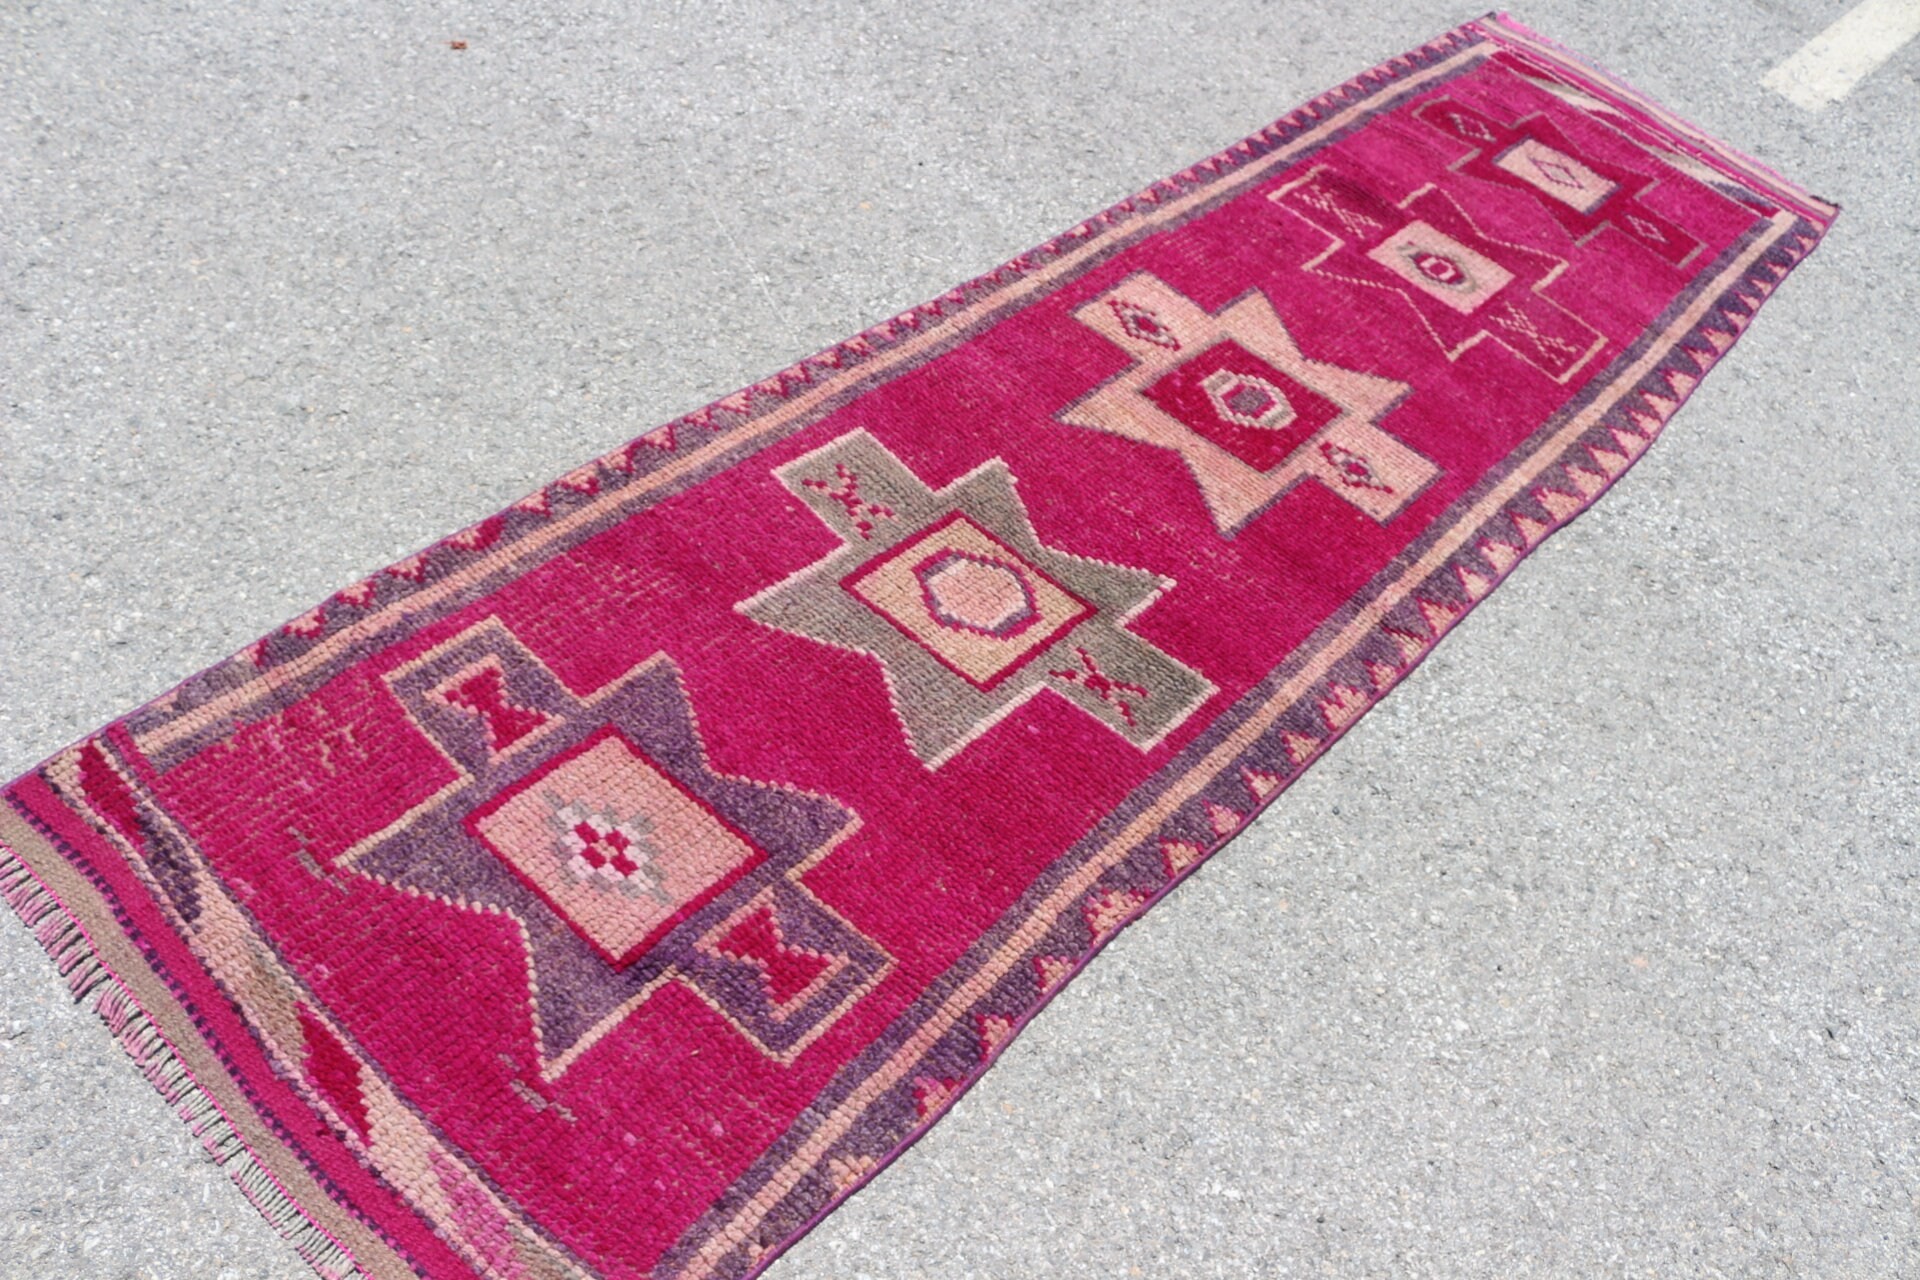 Stair Rug, 2.7x9.5 ft Runner Rugs, Vintage Rugs, Kitchen Rugs, Art Rugs, Turkish Rug, Antique Rugs, Home Decor Rugs, Pink Antique Rug